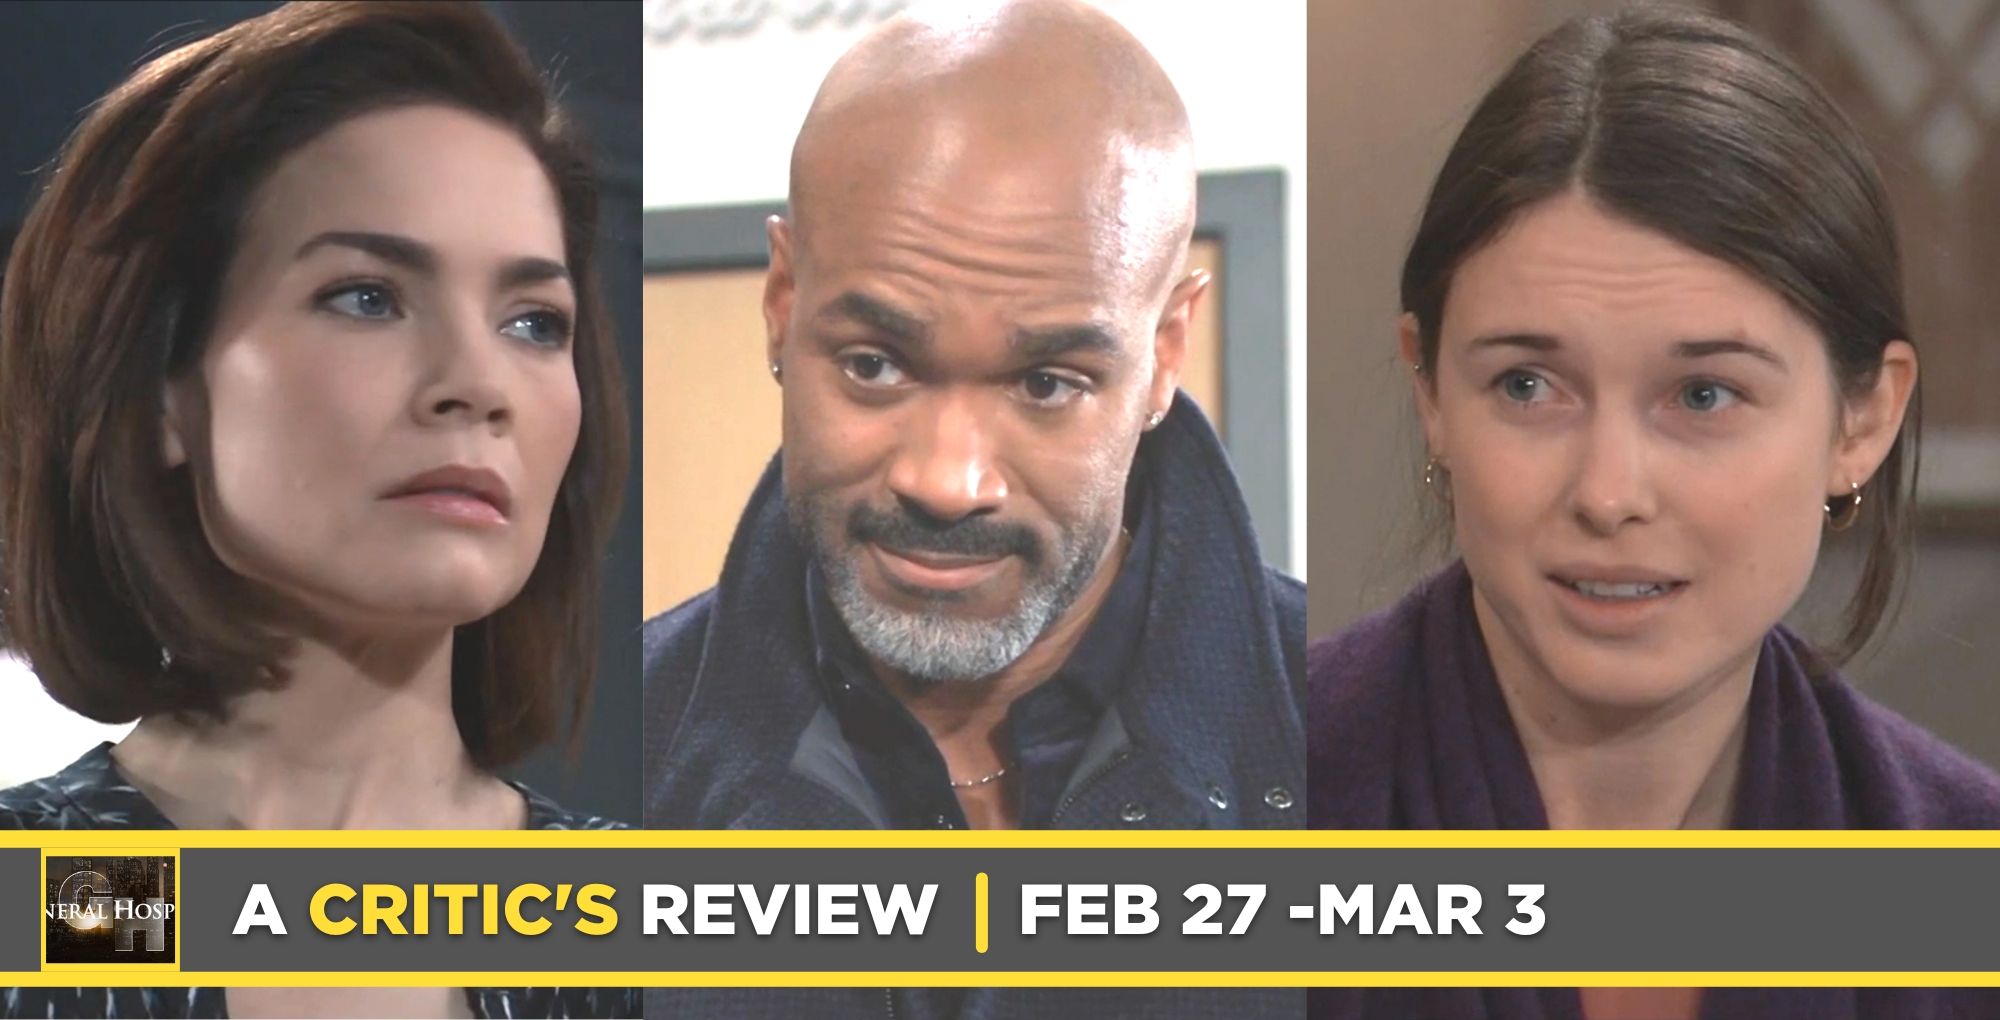 general hospital critic's review for february 27 – march 3, 2023, three images liz, curtis, and willow